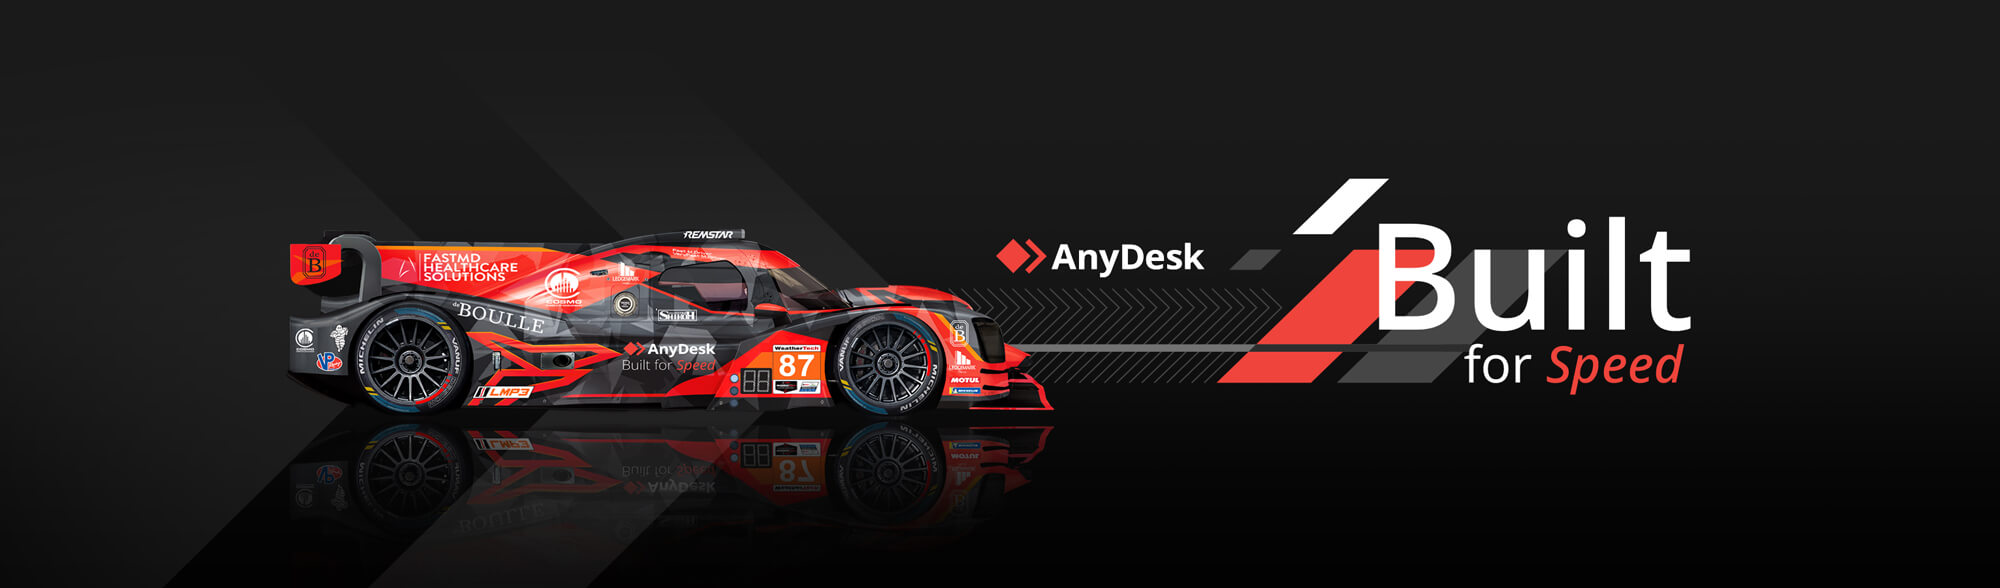 FastMD race car with AnyDesk sponsoring